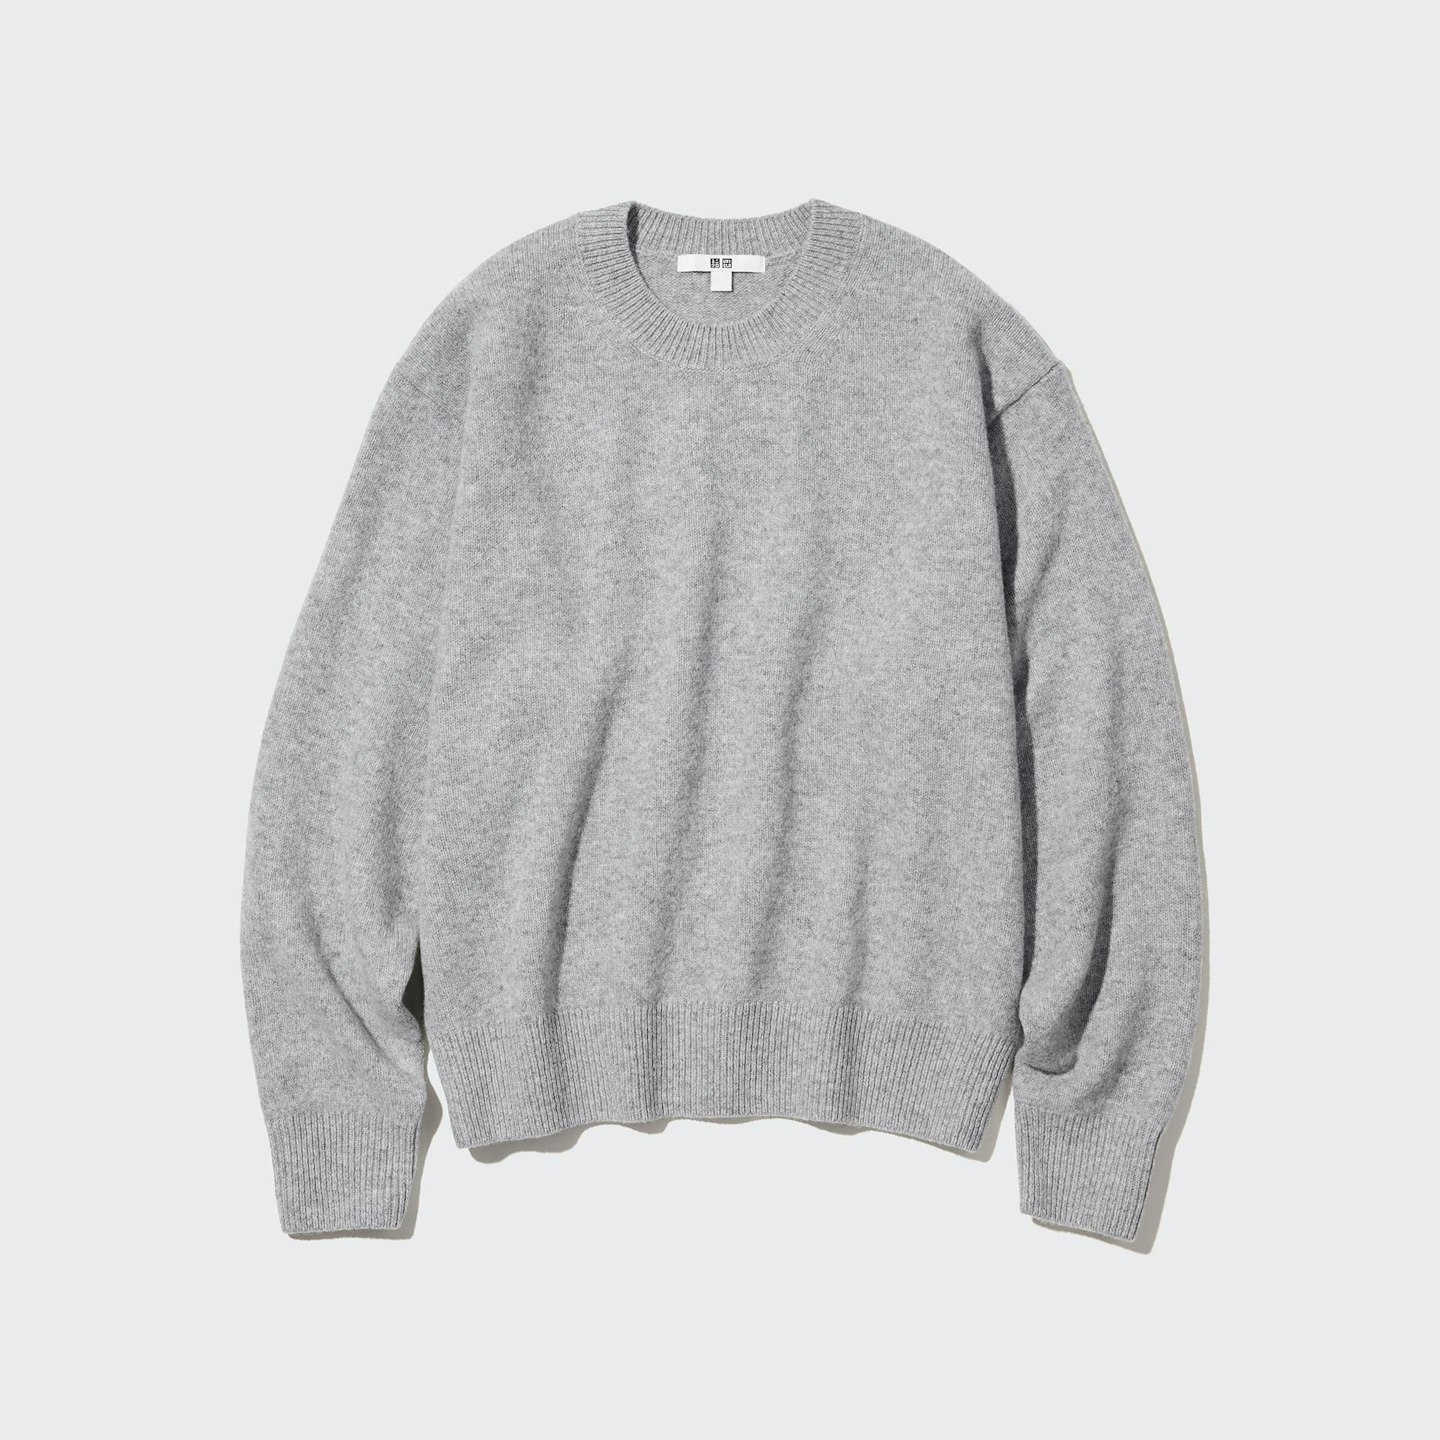 How To Wear Your Grey Jumper For 2023